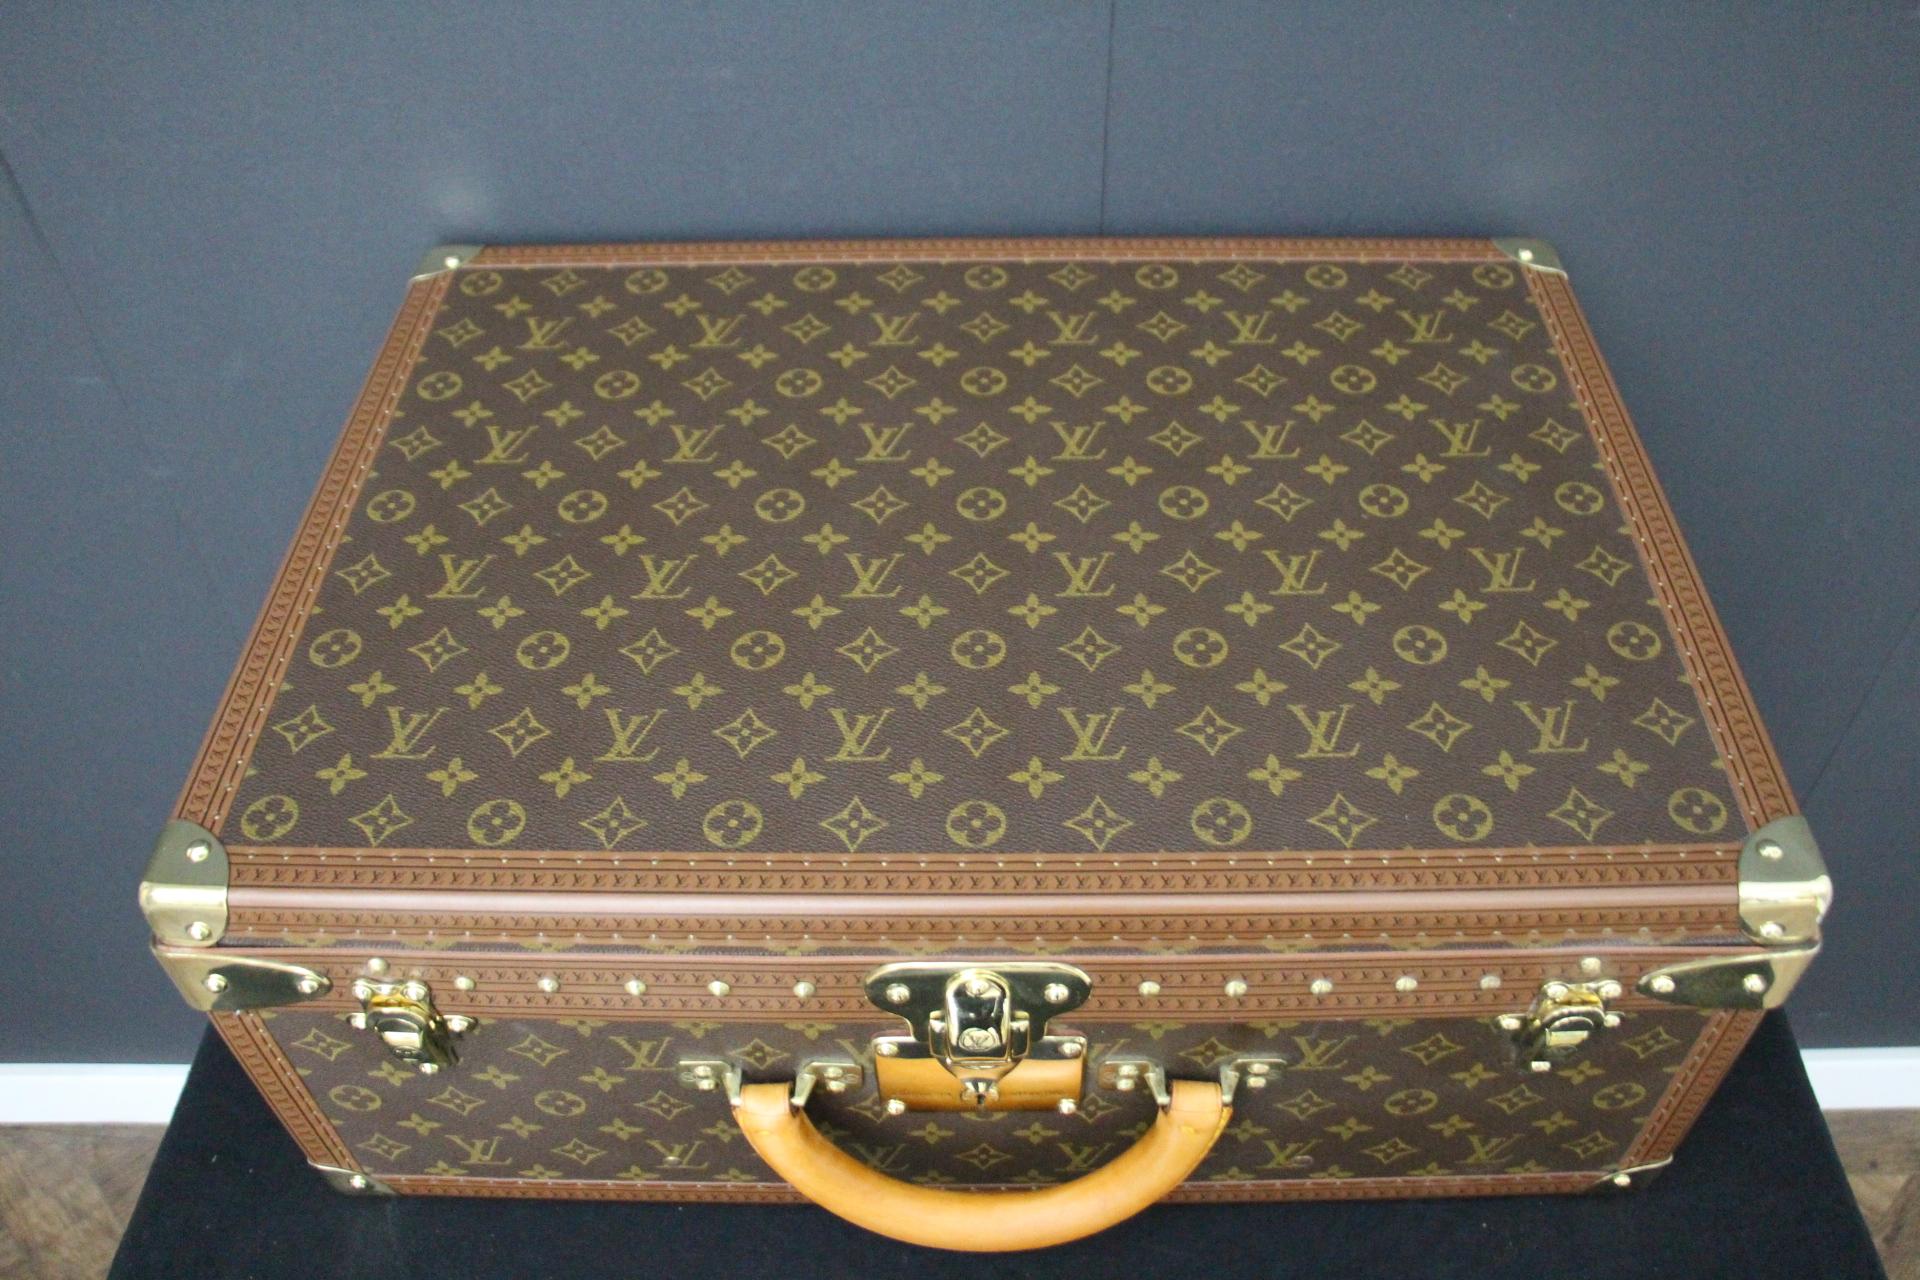 This is a magnificent little Louis Vuitton Alzer monogramm suitcase. The Alzer collection is the top of the range of Vuitton suitcase, the most luxurious pieces . Moreover this size is very rare and sought after. It features 
all Louis Vuitton